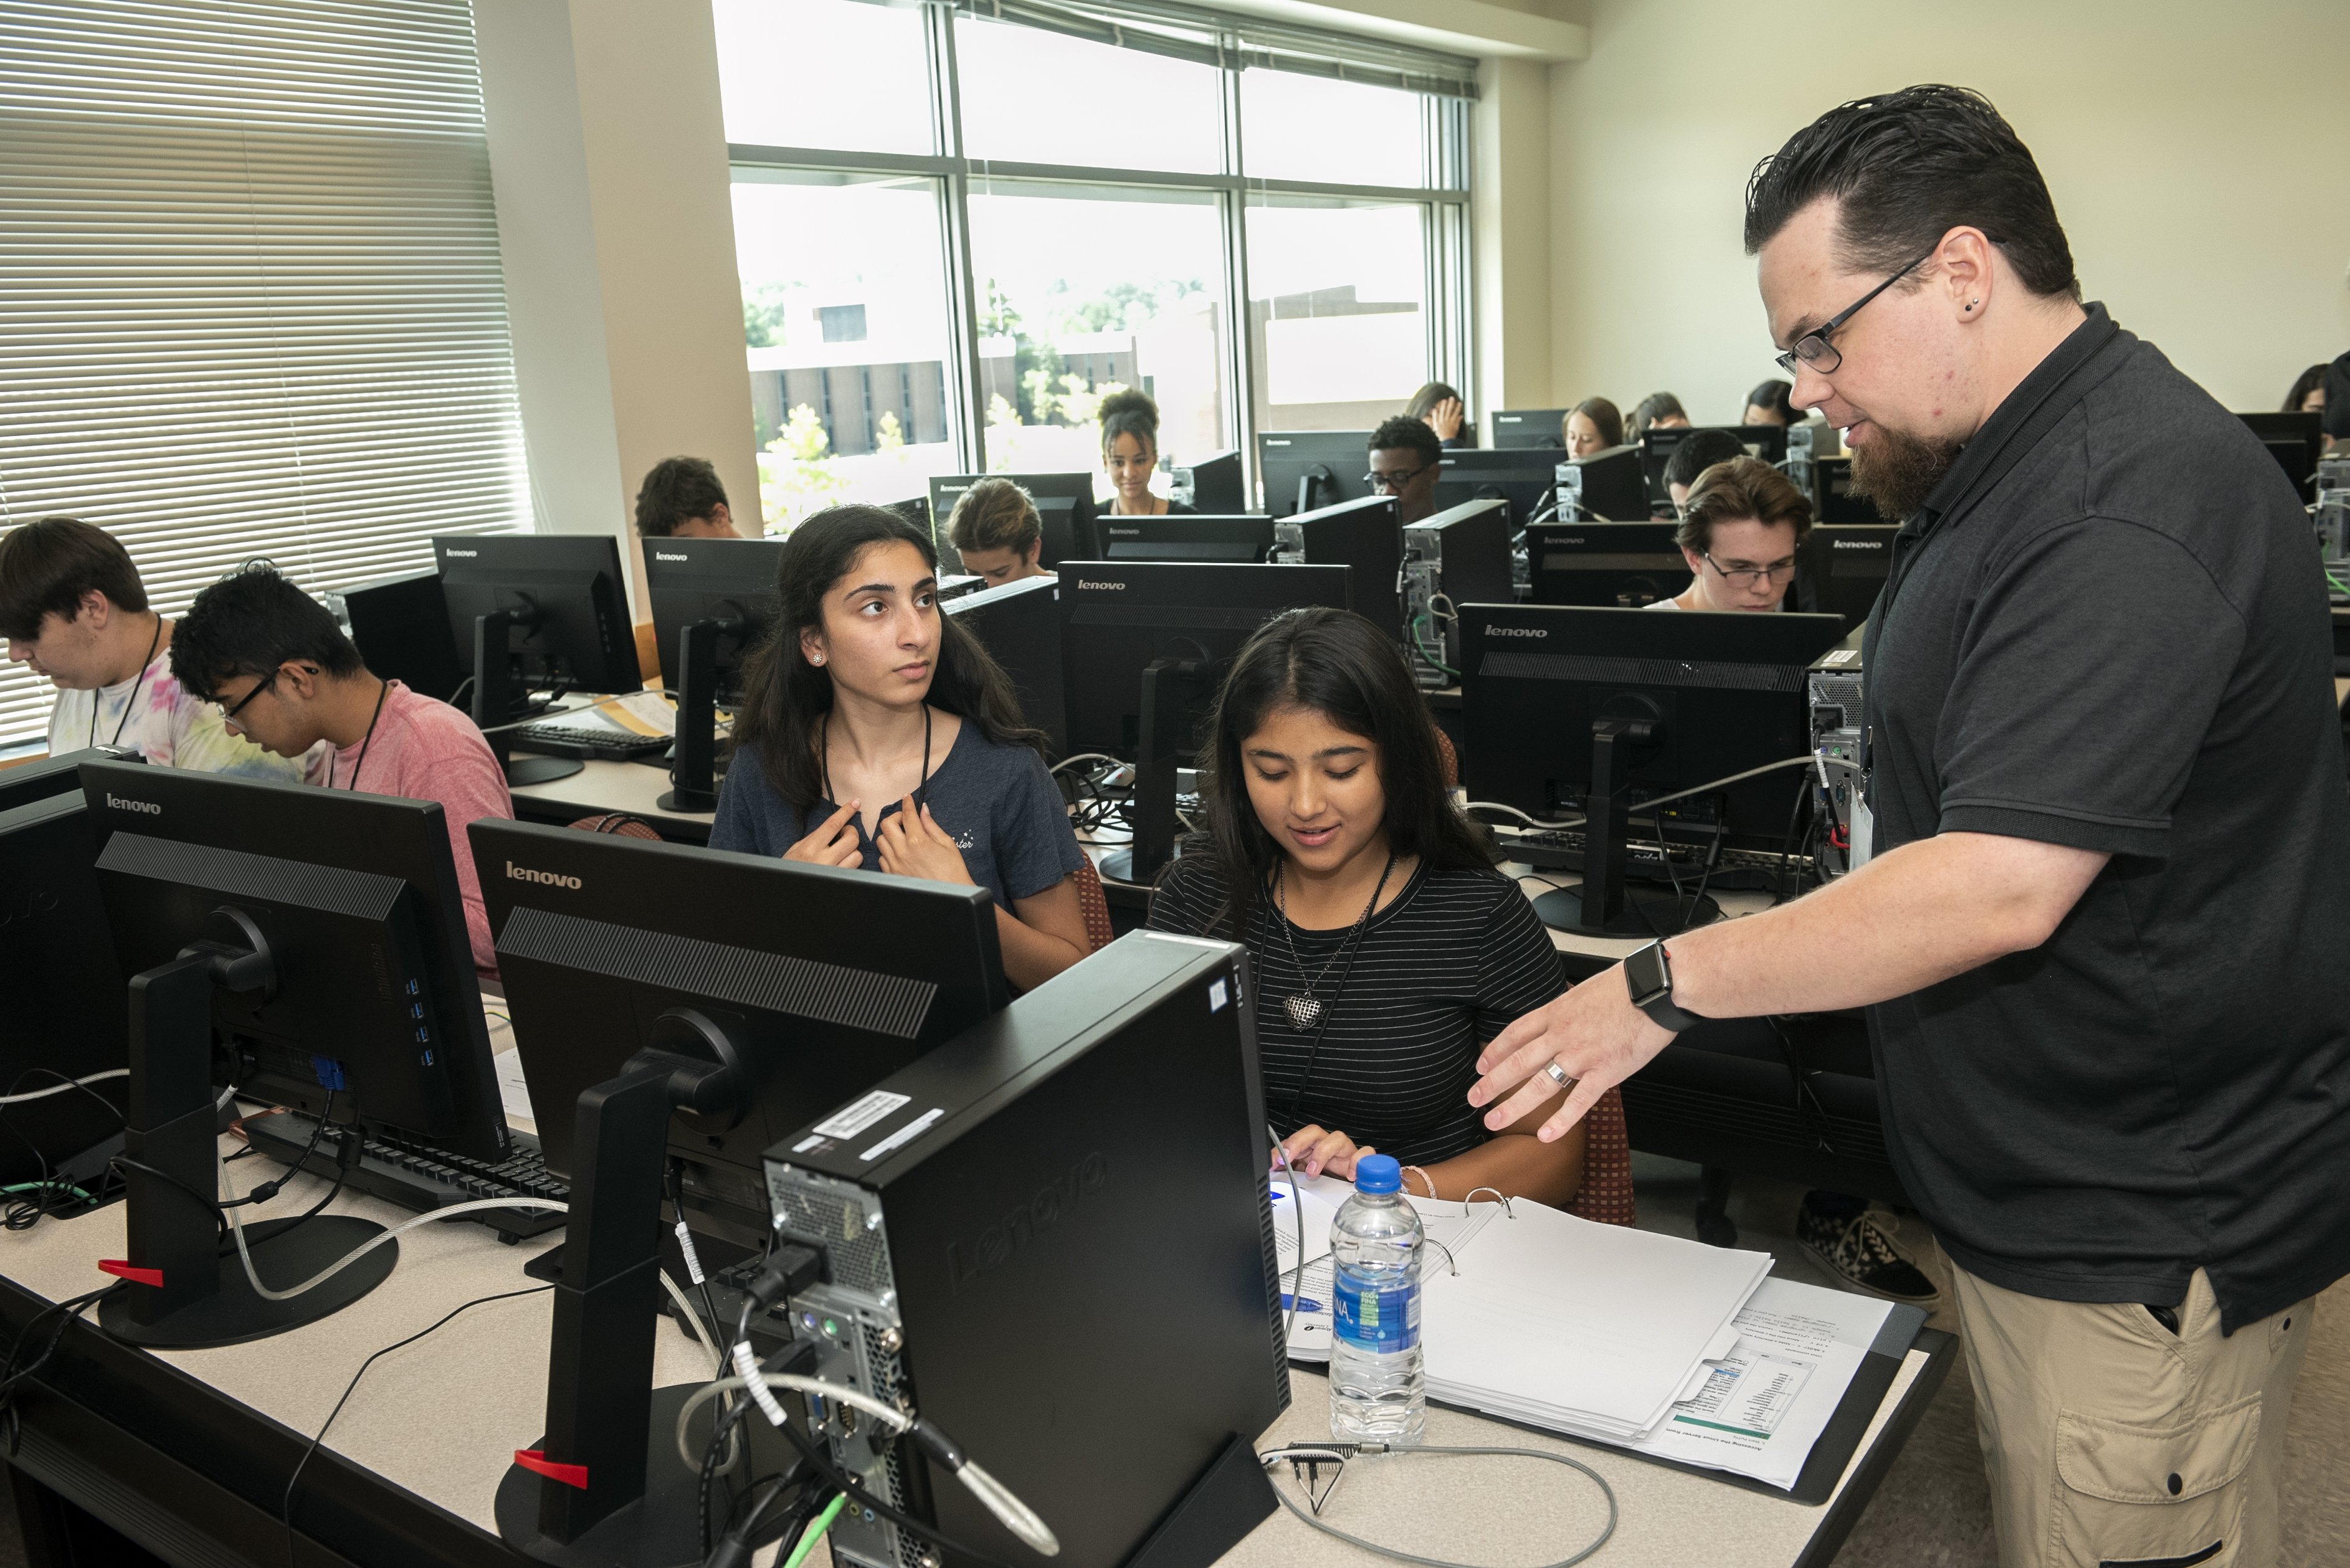 Students, educators glimpse the future of cybersecurity at Rowan camps ...